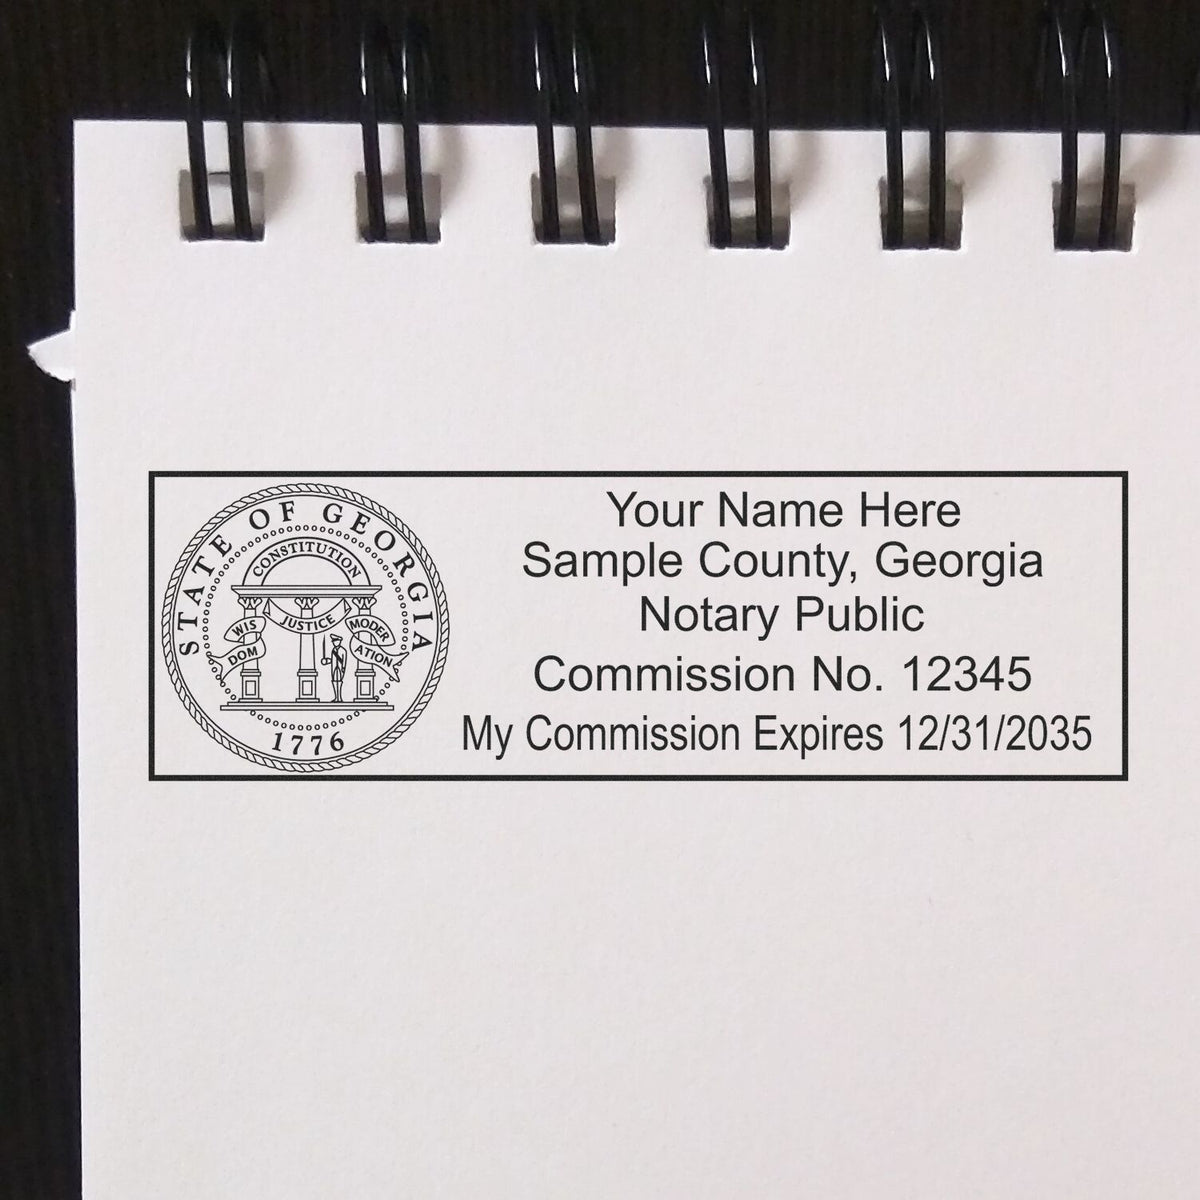 An alternative view of the PSI Georgia Notary Stamp stamped on a sheet of paper showing the image in use